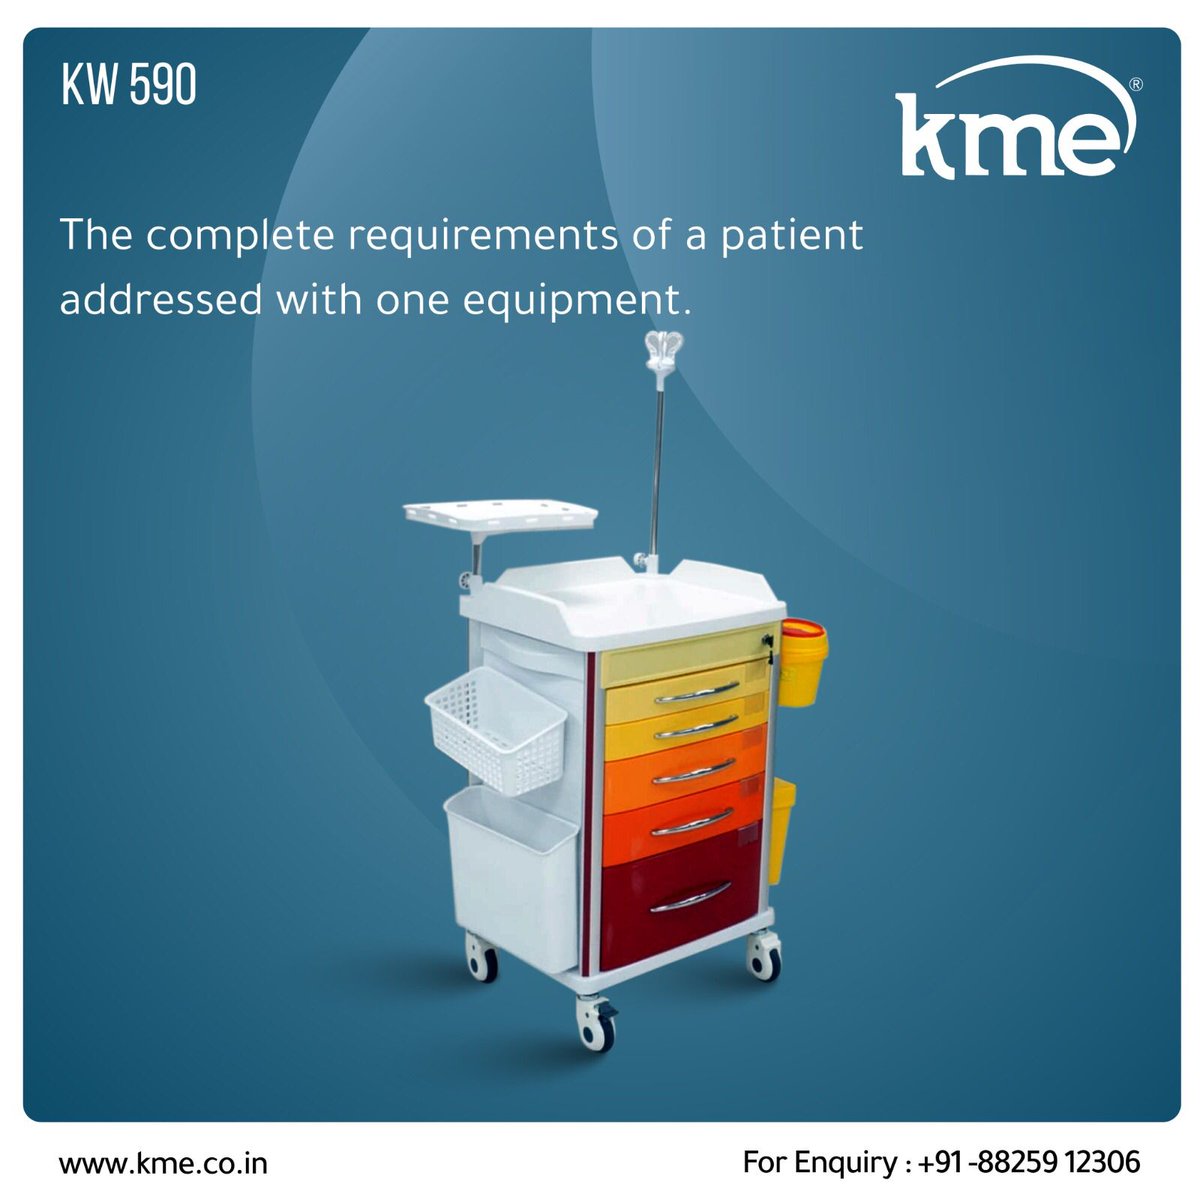 A unique complete multi-purpose kit that can accommodate the requirements of a patient.

For more information, please see the link in our bio or call us at +919842243891

#KME #kwalitymedeexporters #medicalequipments #medicalequipmentsupplier